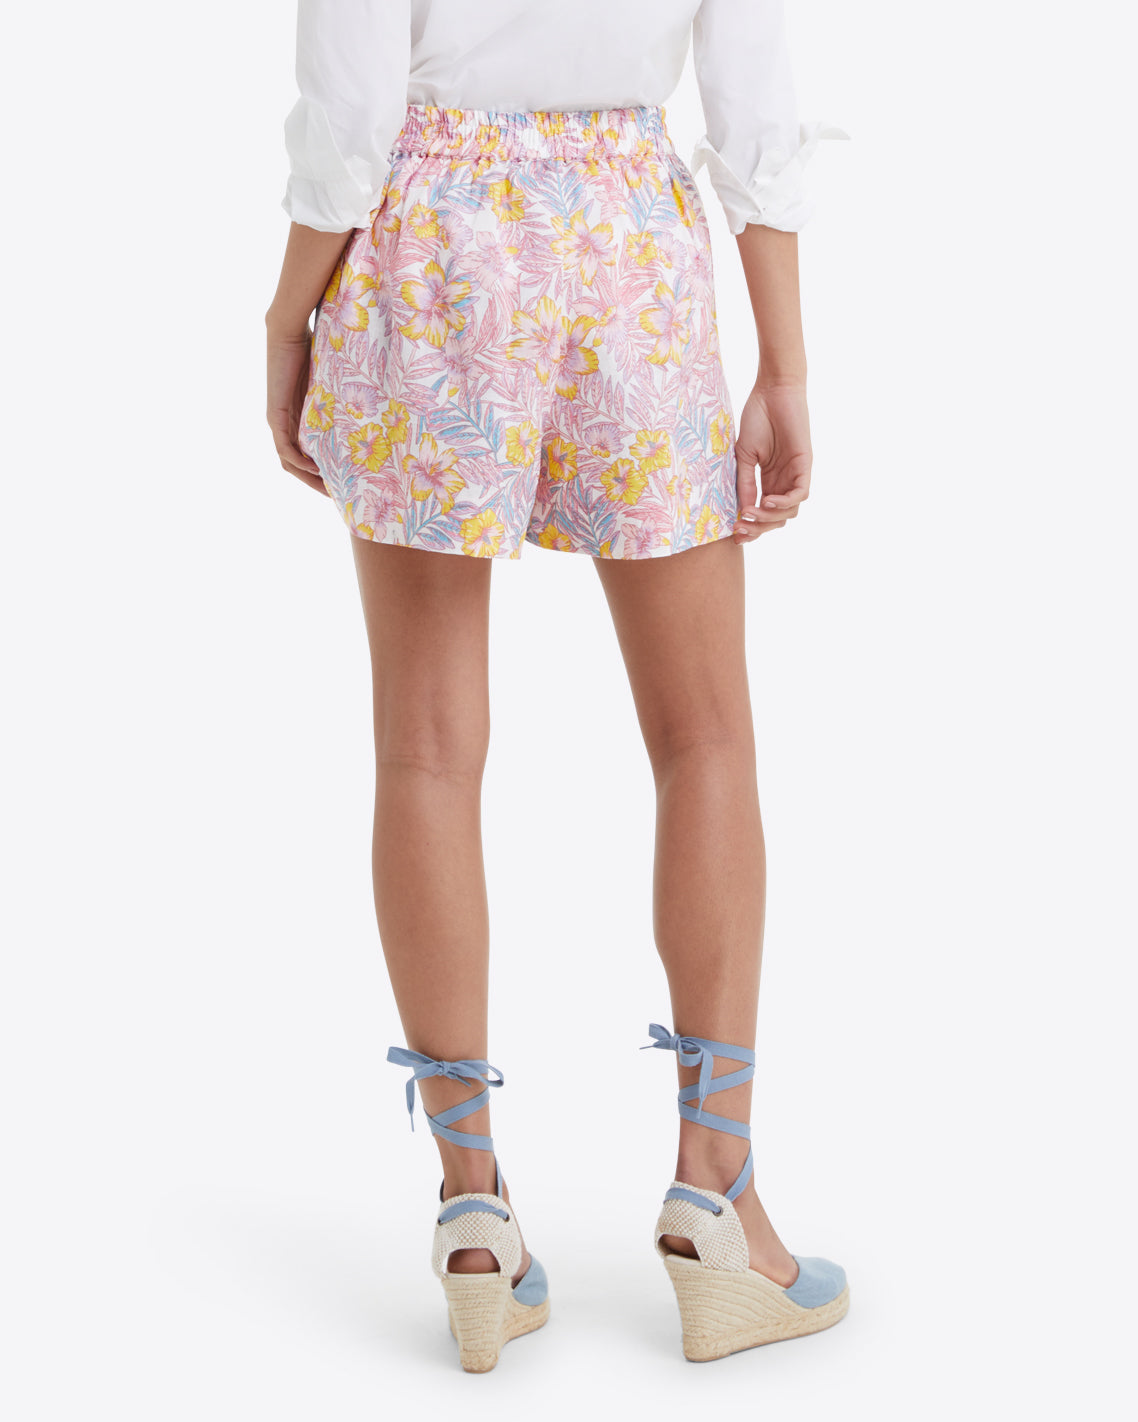 Woven Pull On Shorts in Lily Floral